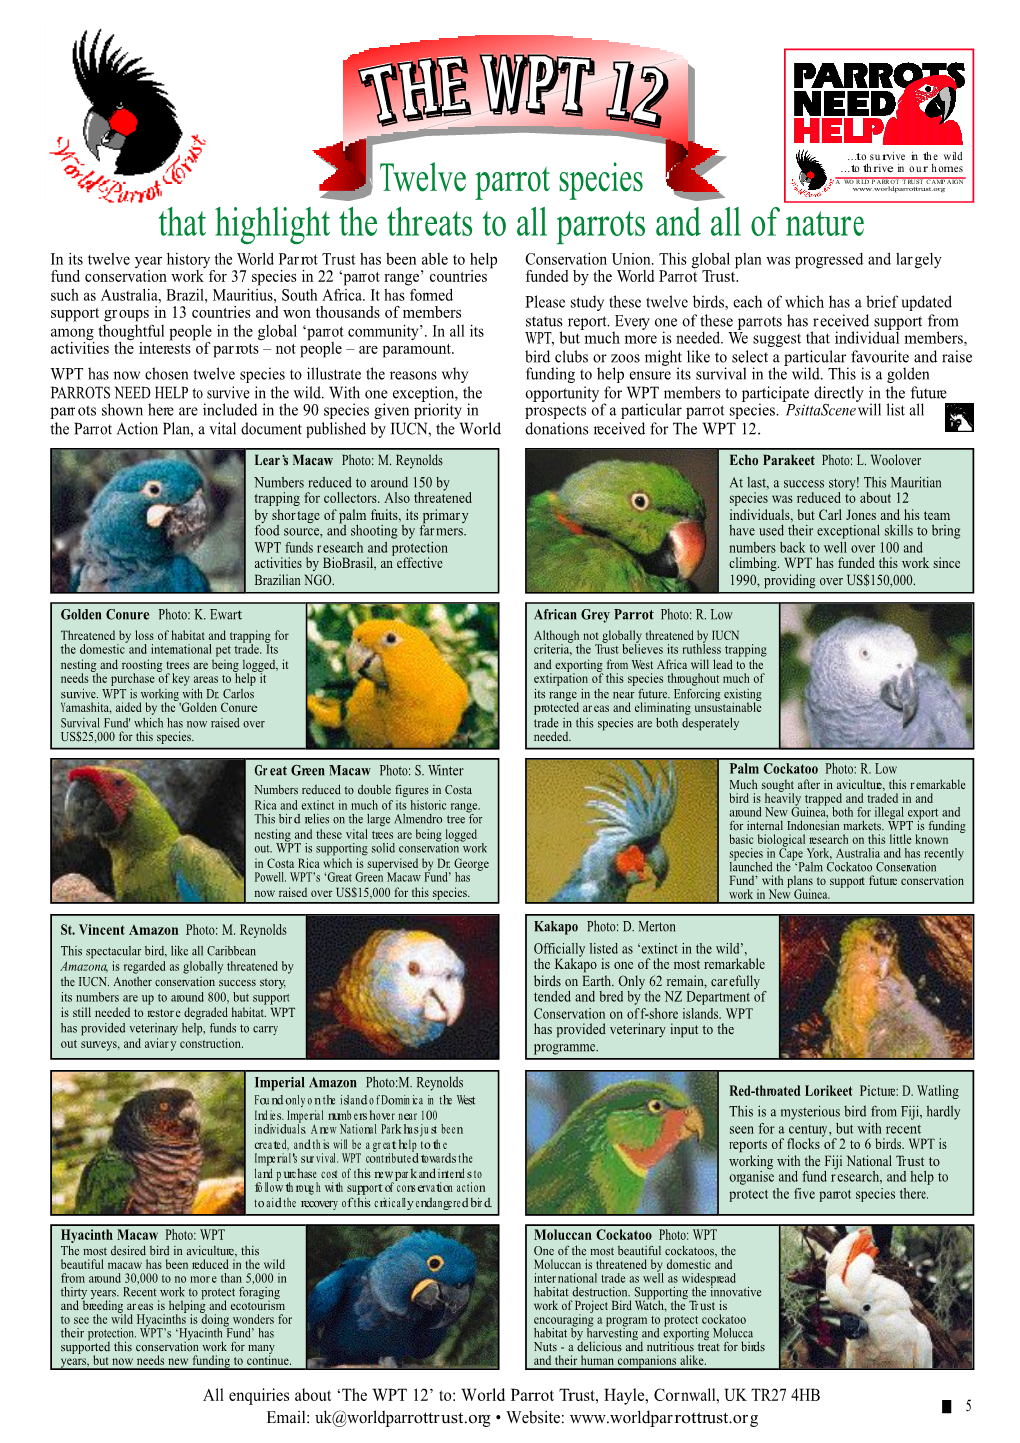 Twelve Parrot Species That Highlight the Threats to All Parrots and All Of